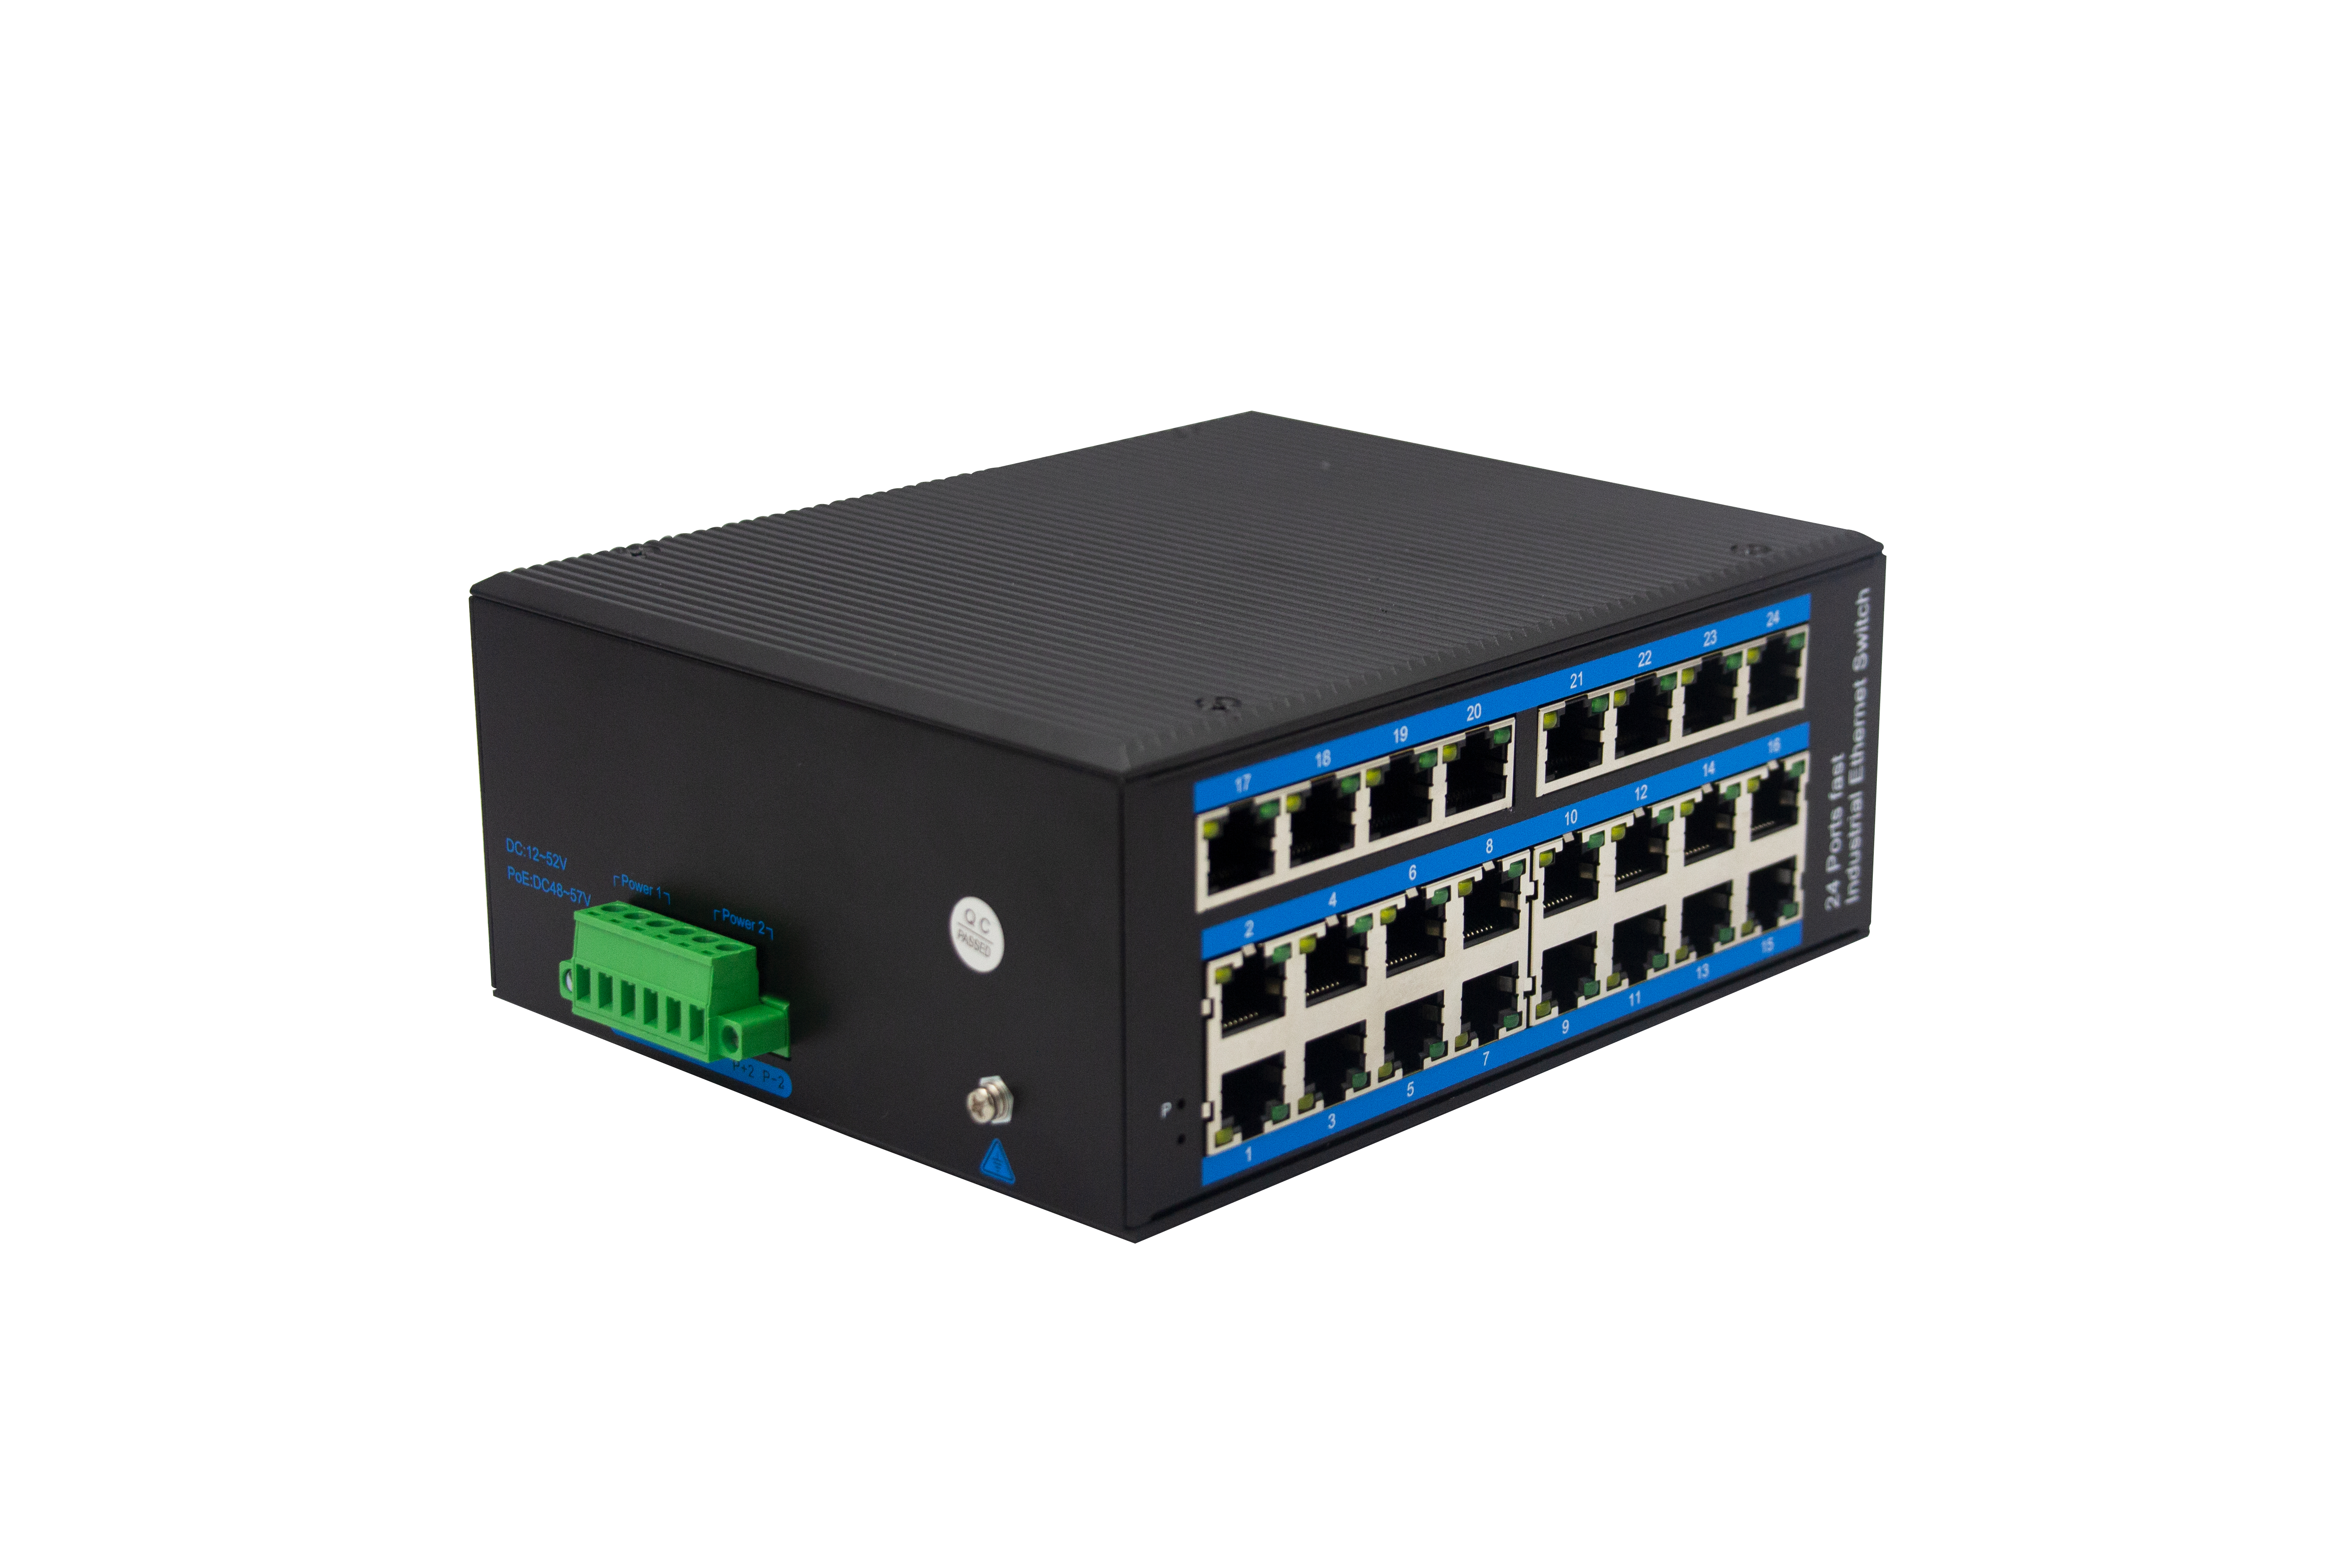 What is industrial Ethernet switch?